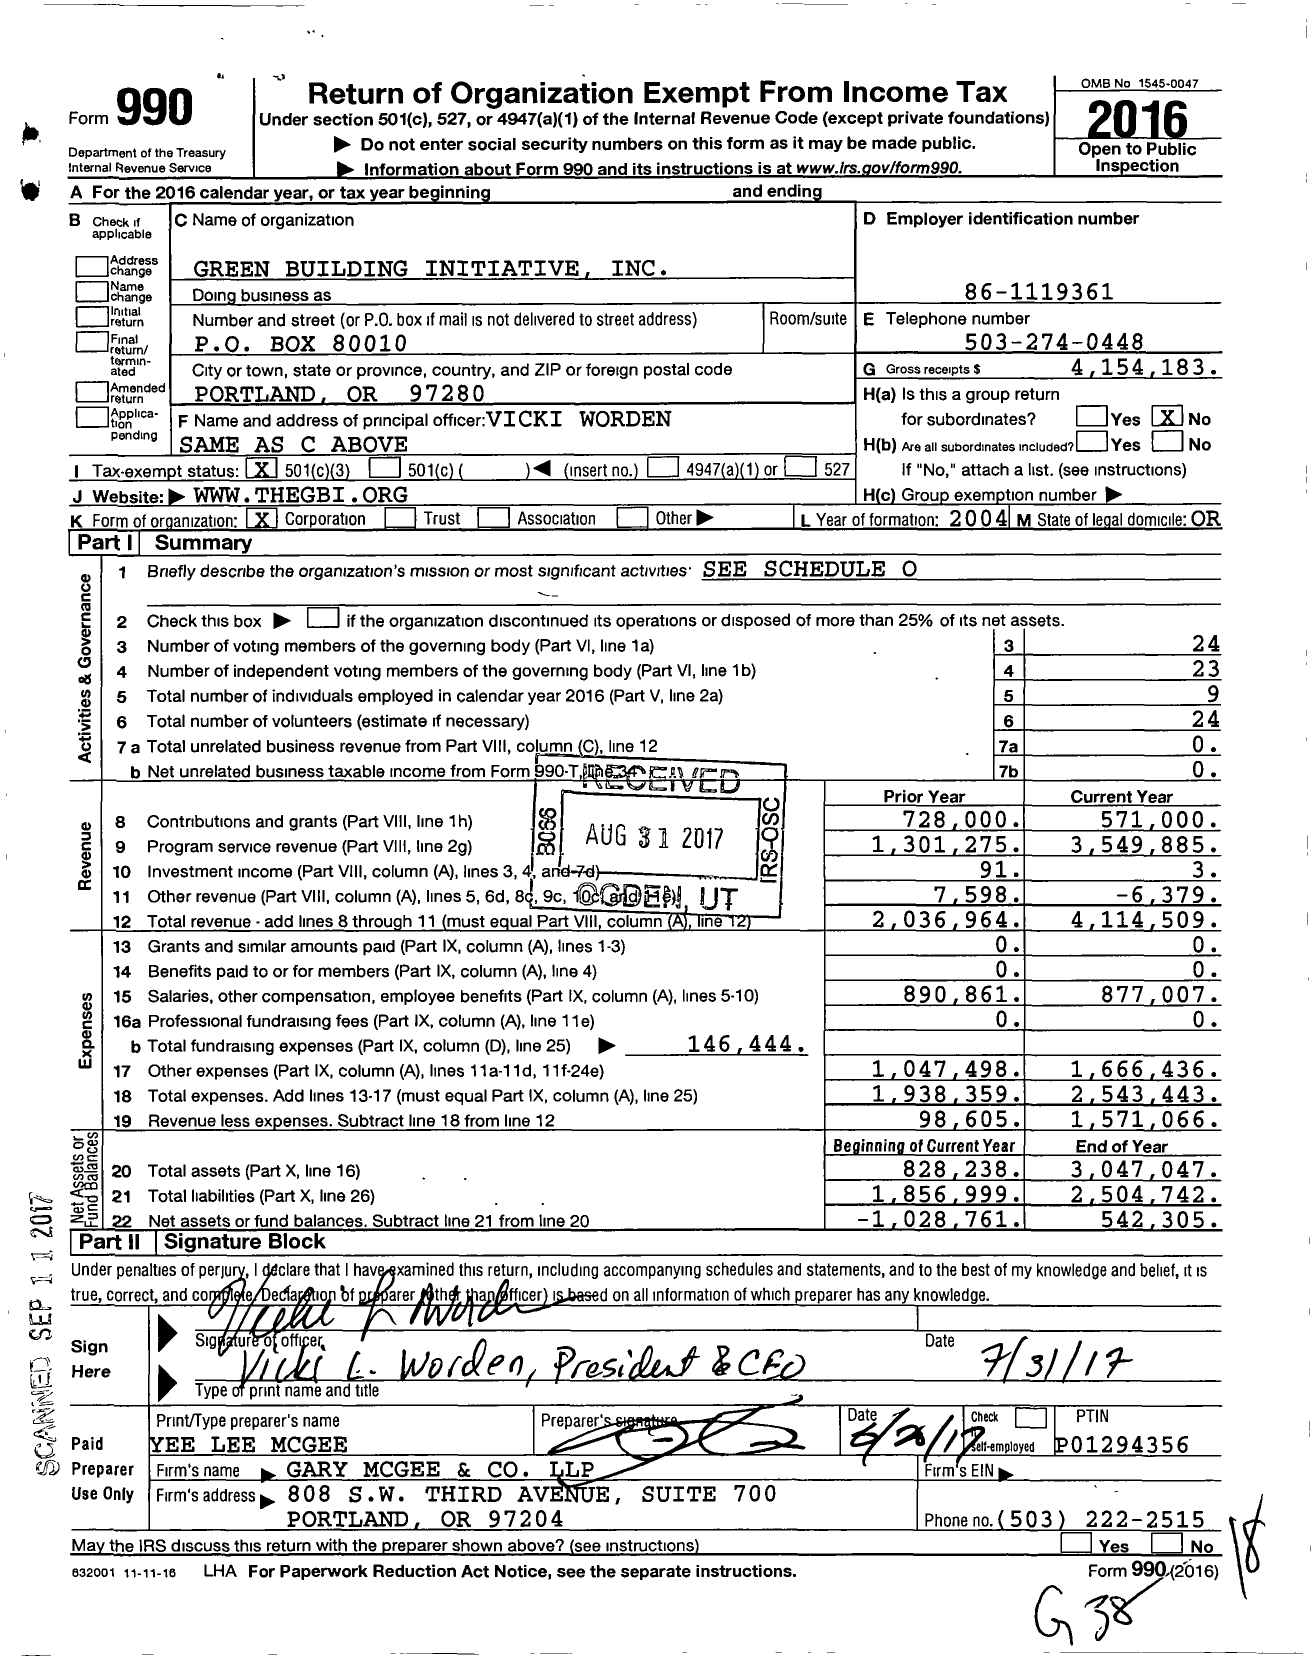 Image of first page of 2016 Form 990 for Green Building Initiative (GBI)